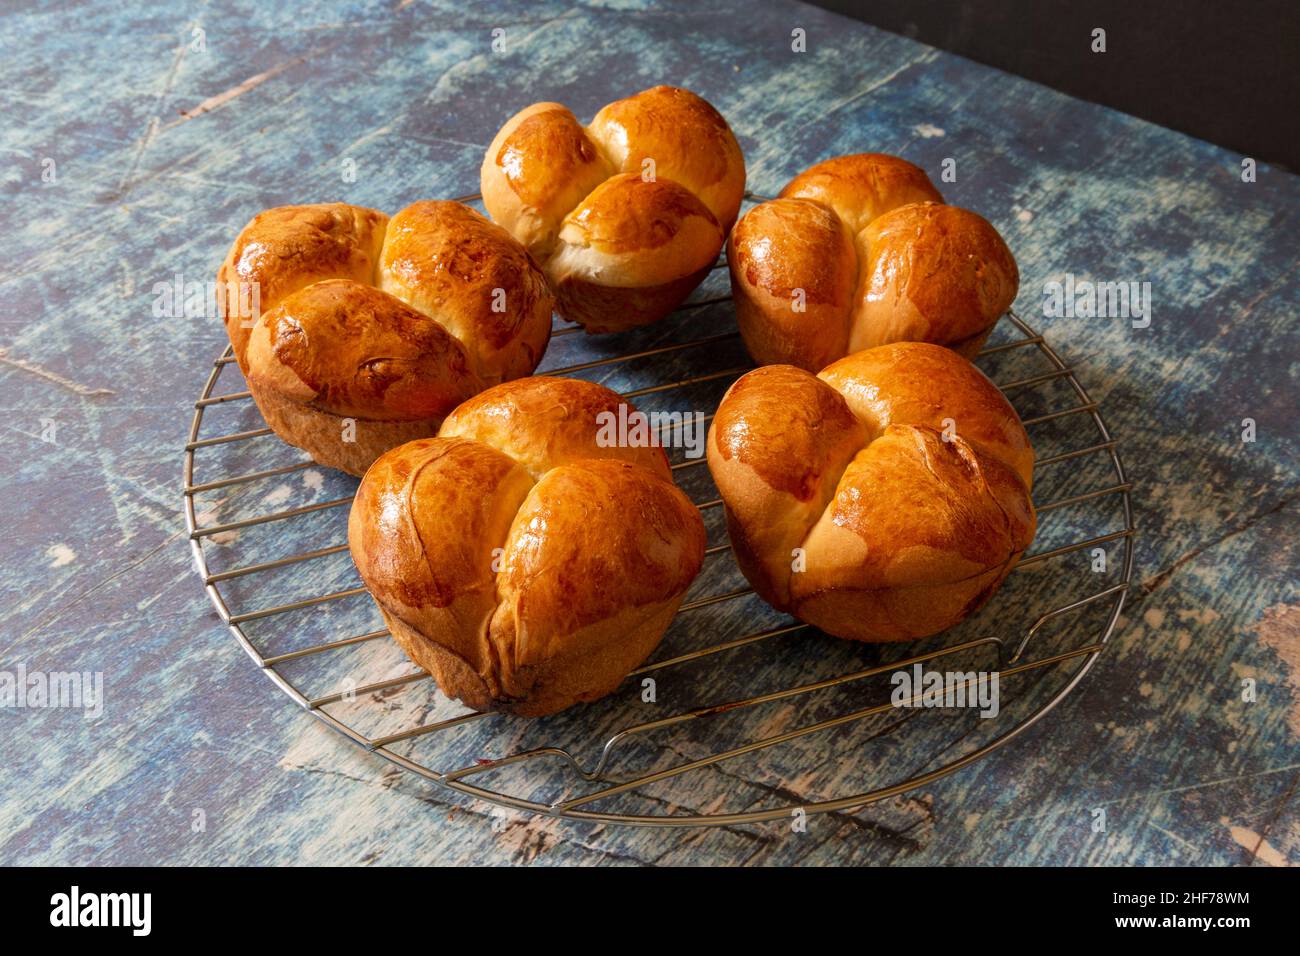 Homemade bread rolls fresh out of the oven Stock Photo